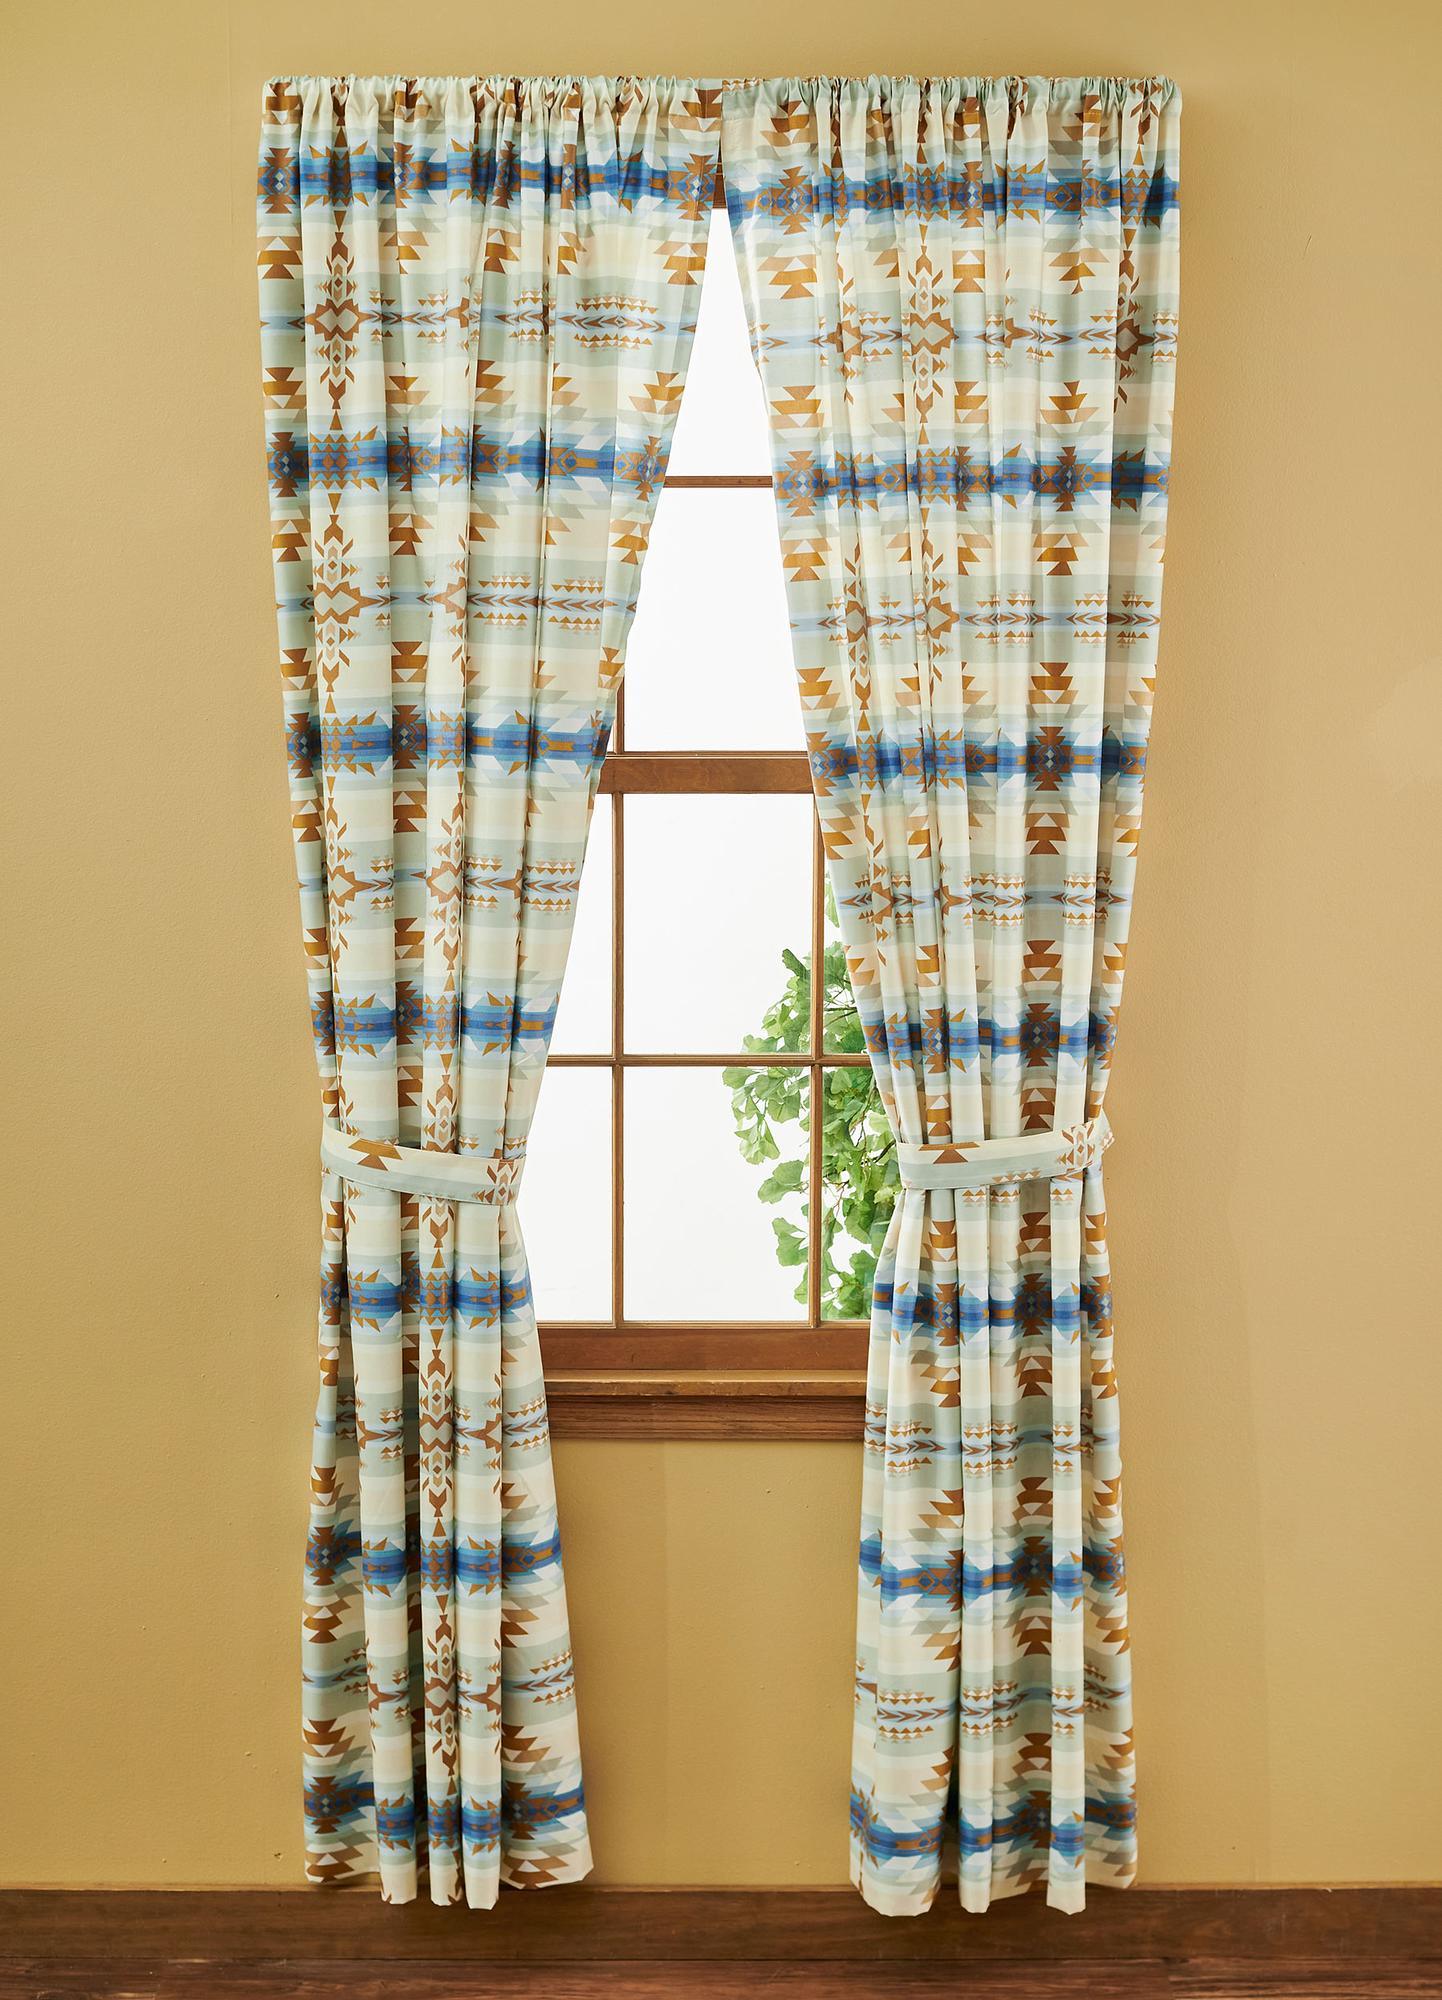 Stack Rock Patterned Window Covering - Wild Wings